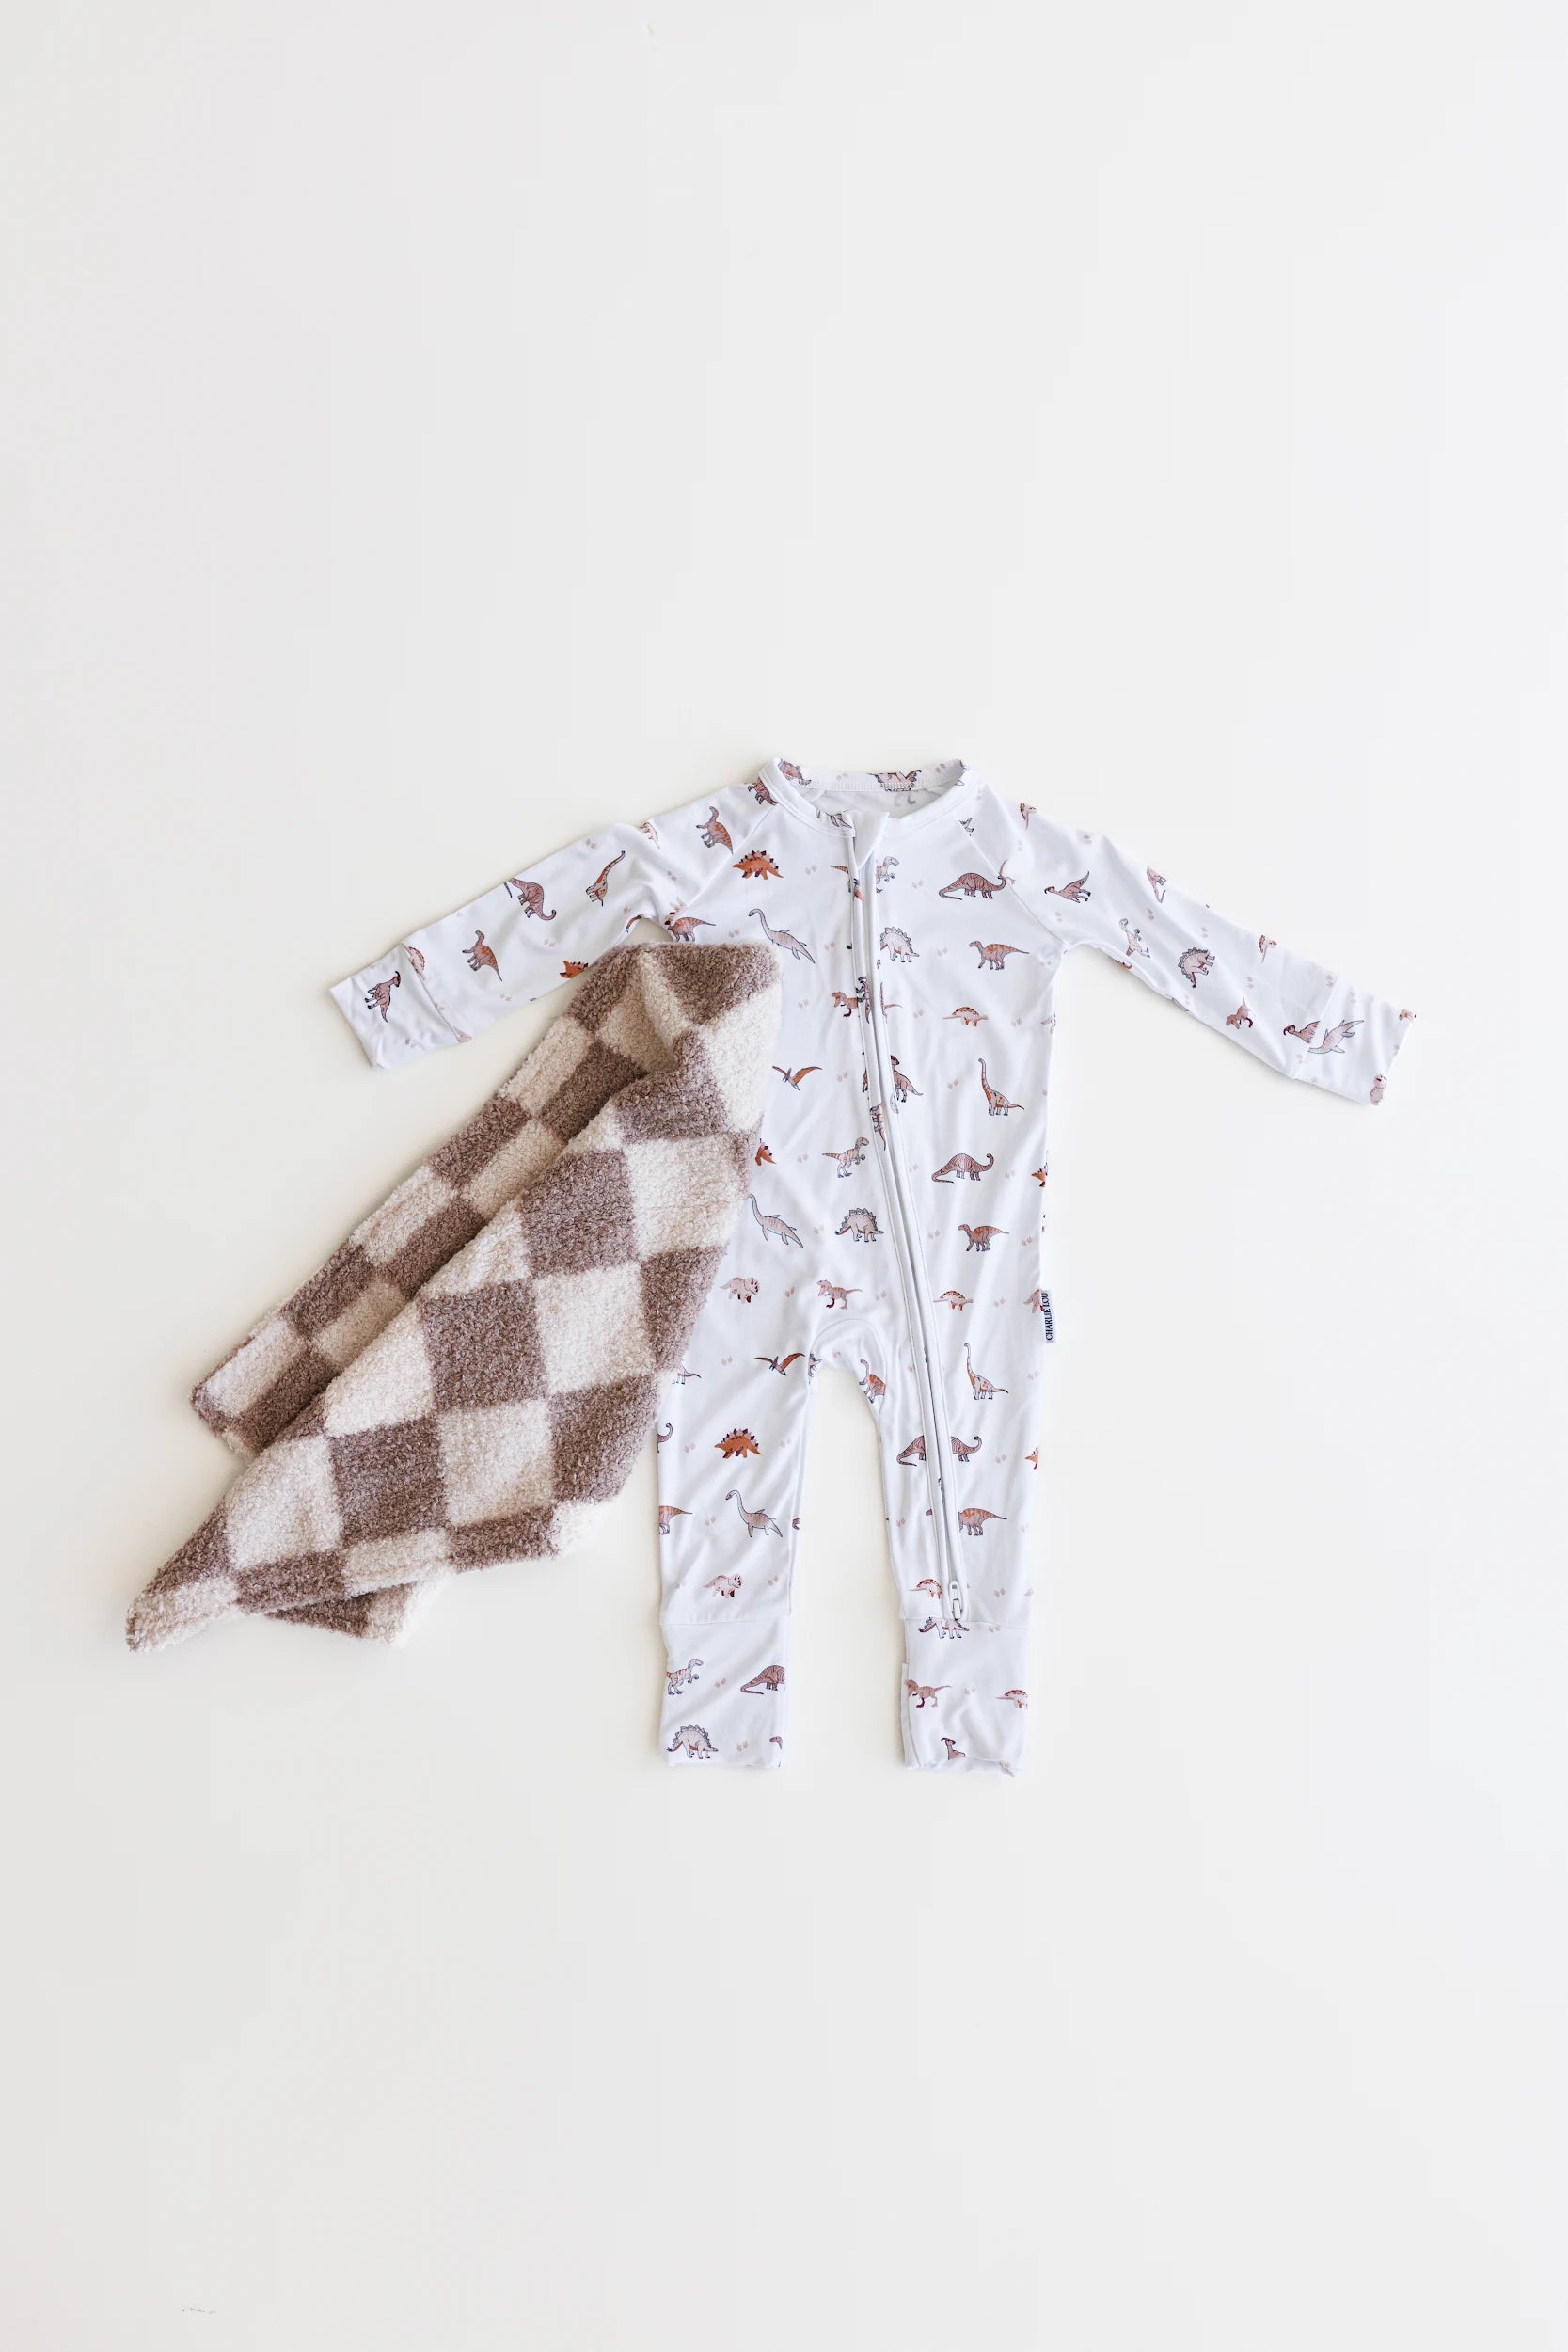 Double zipper baby romper with convertible hand & foot cuffs made from bamboo with neutral dinosaur print for boys or girls.